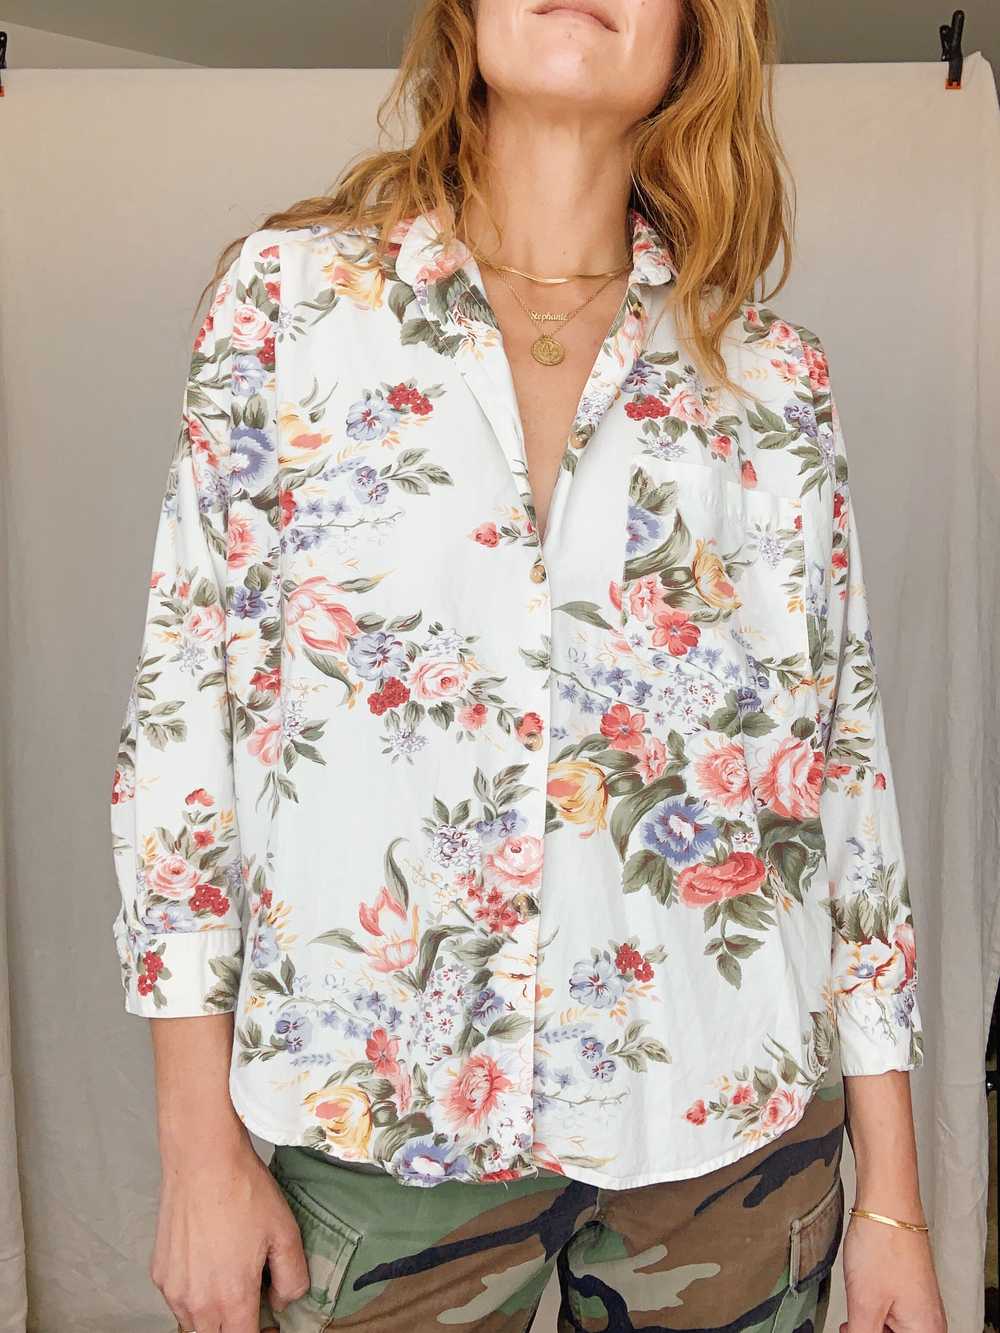 90s Country Floral Button Up Top - image 6